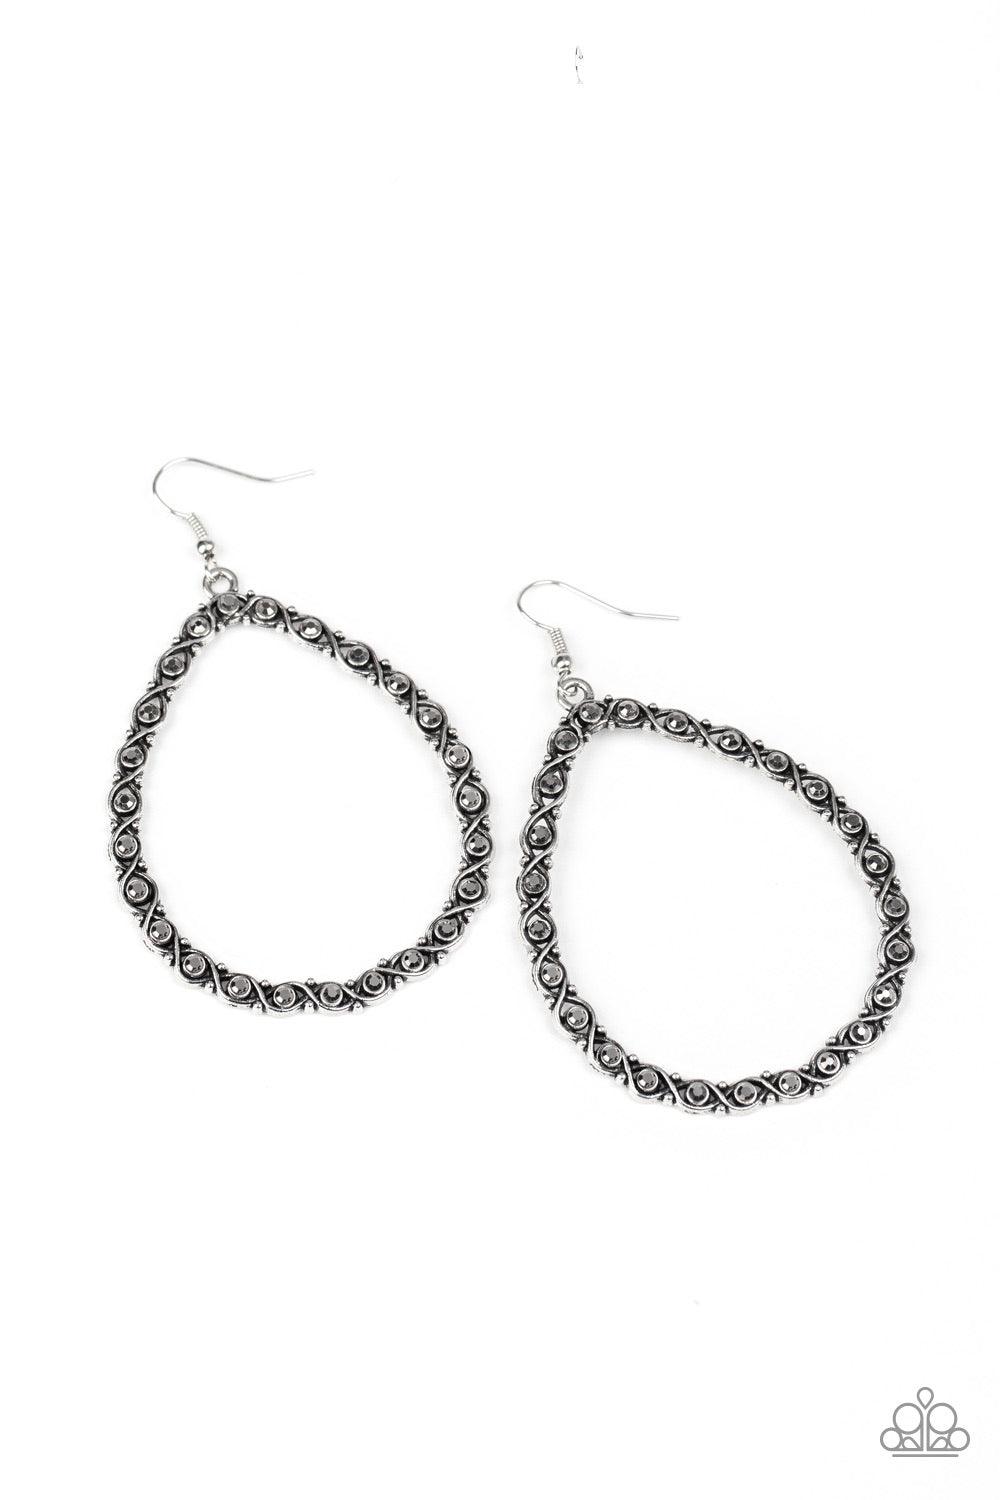 Paparazzi Accessories Galaxy Gardens - Silver Antiqued silver bars delicately twist around smoky hematite rhinestones, coalescing into a bedazzling teardrop lure. Earring attaches to a standard fishhook fitting. Jewelry